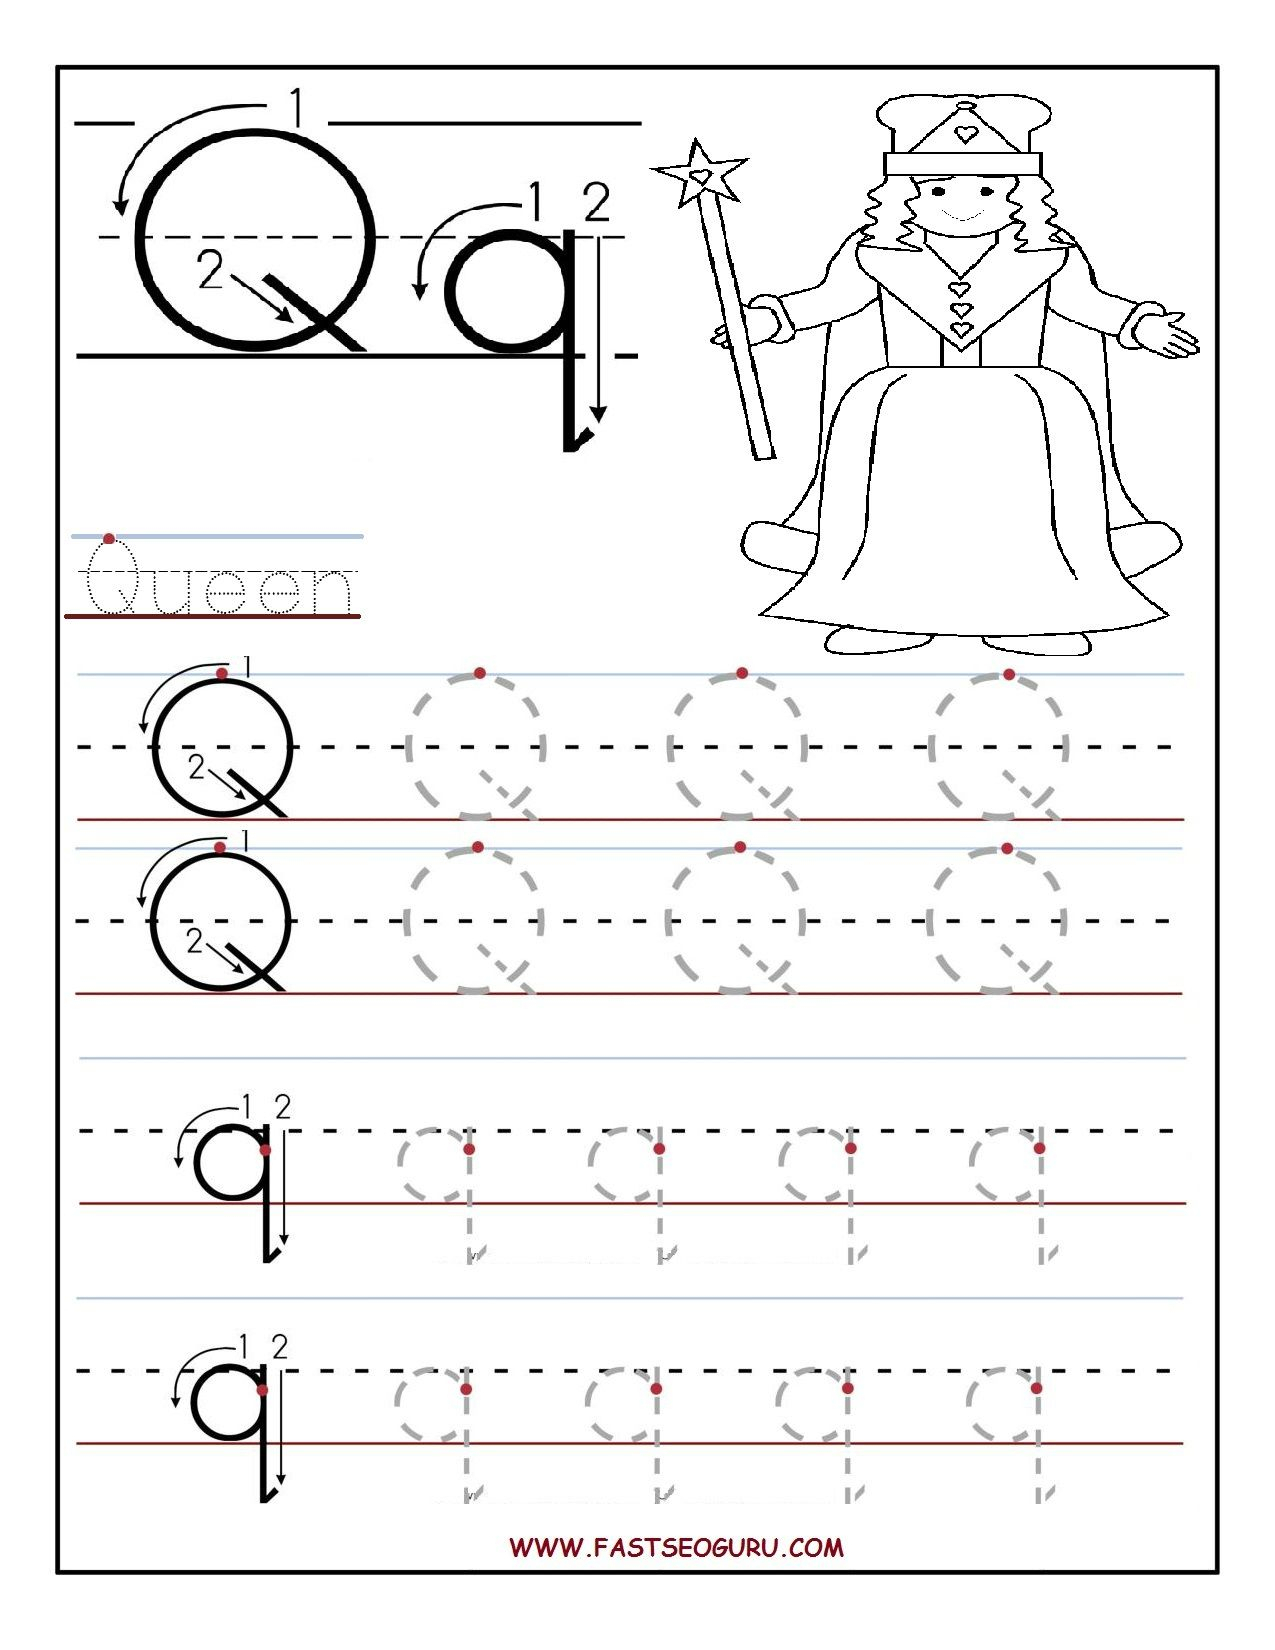 Printable Letter Q Tracing Worksheets For Preschool in Action Alphabet Tracing Letters